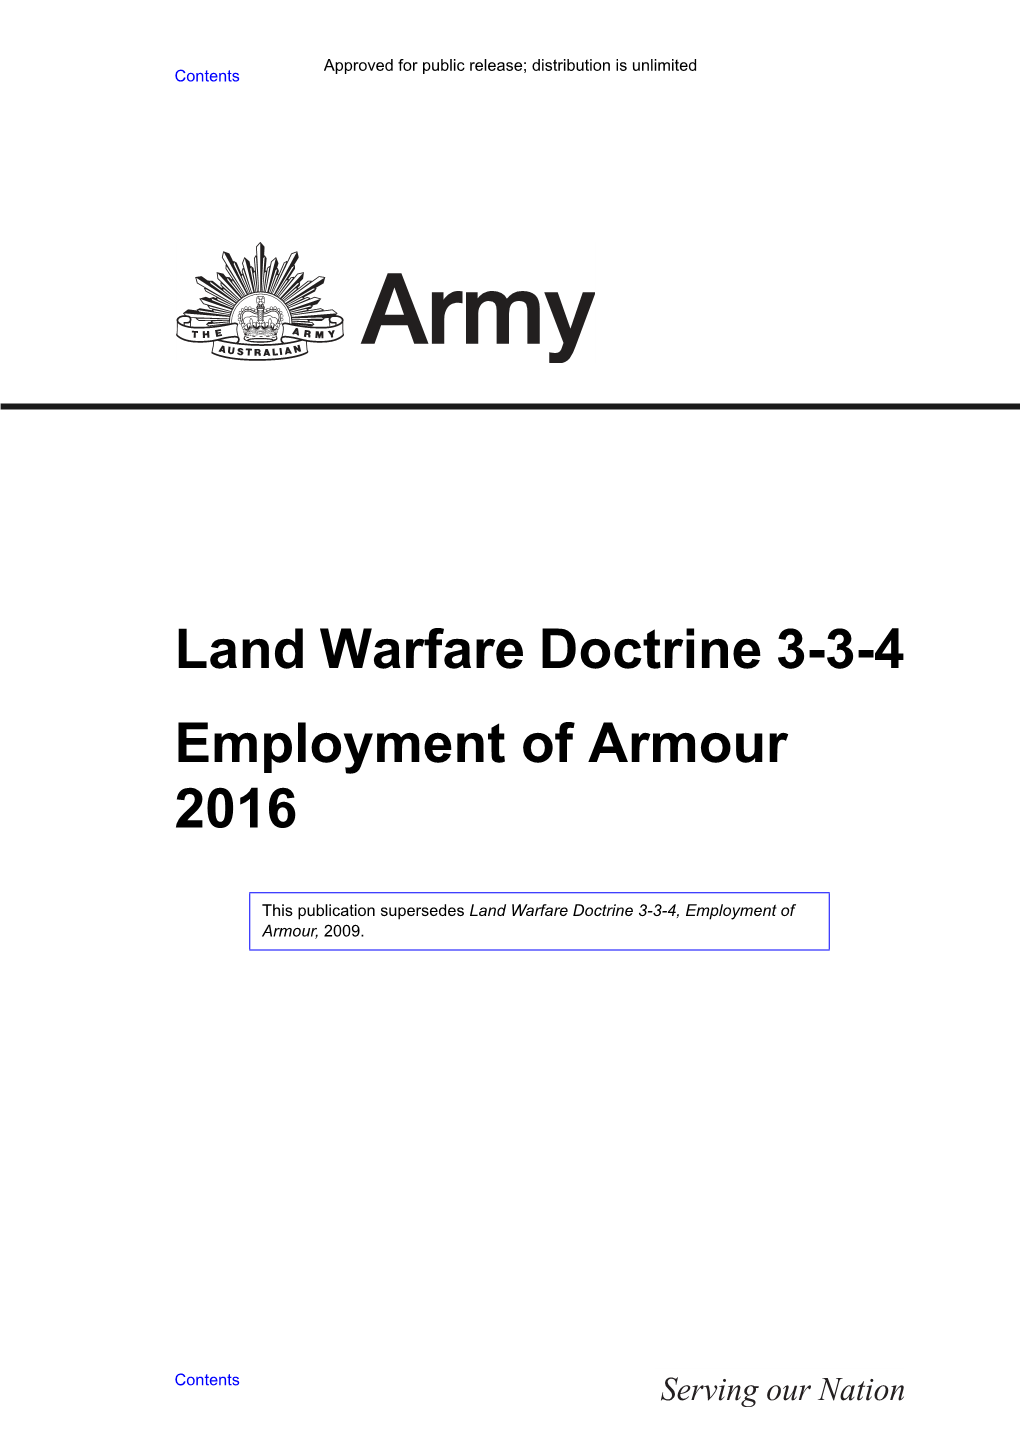 LWD 3-3-4, Employment of Armour 2016